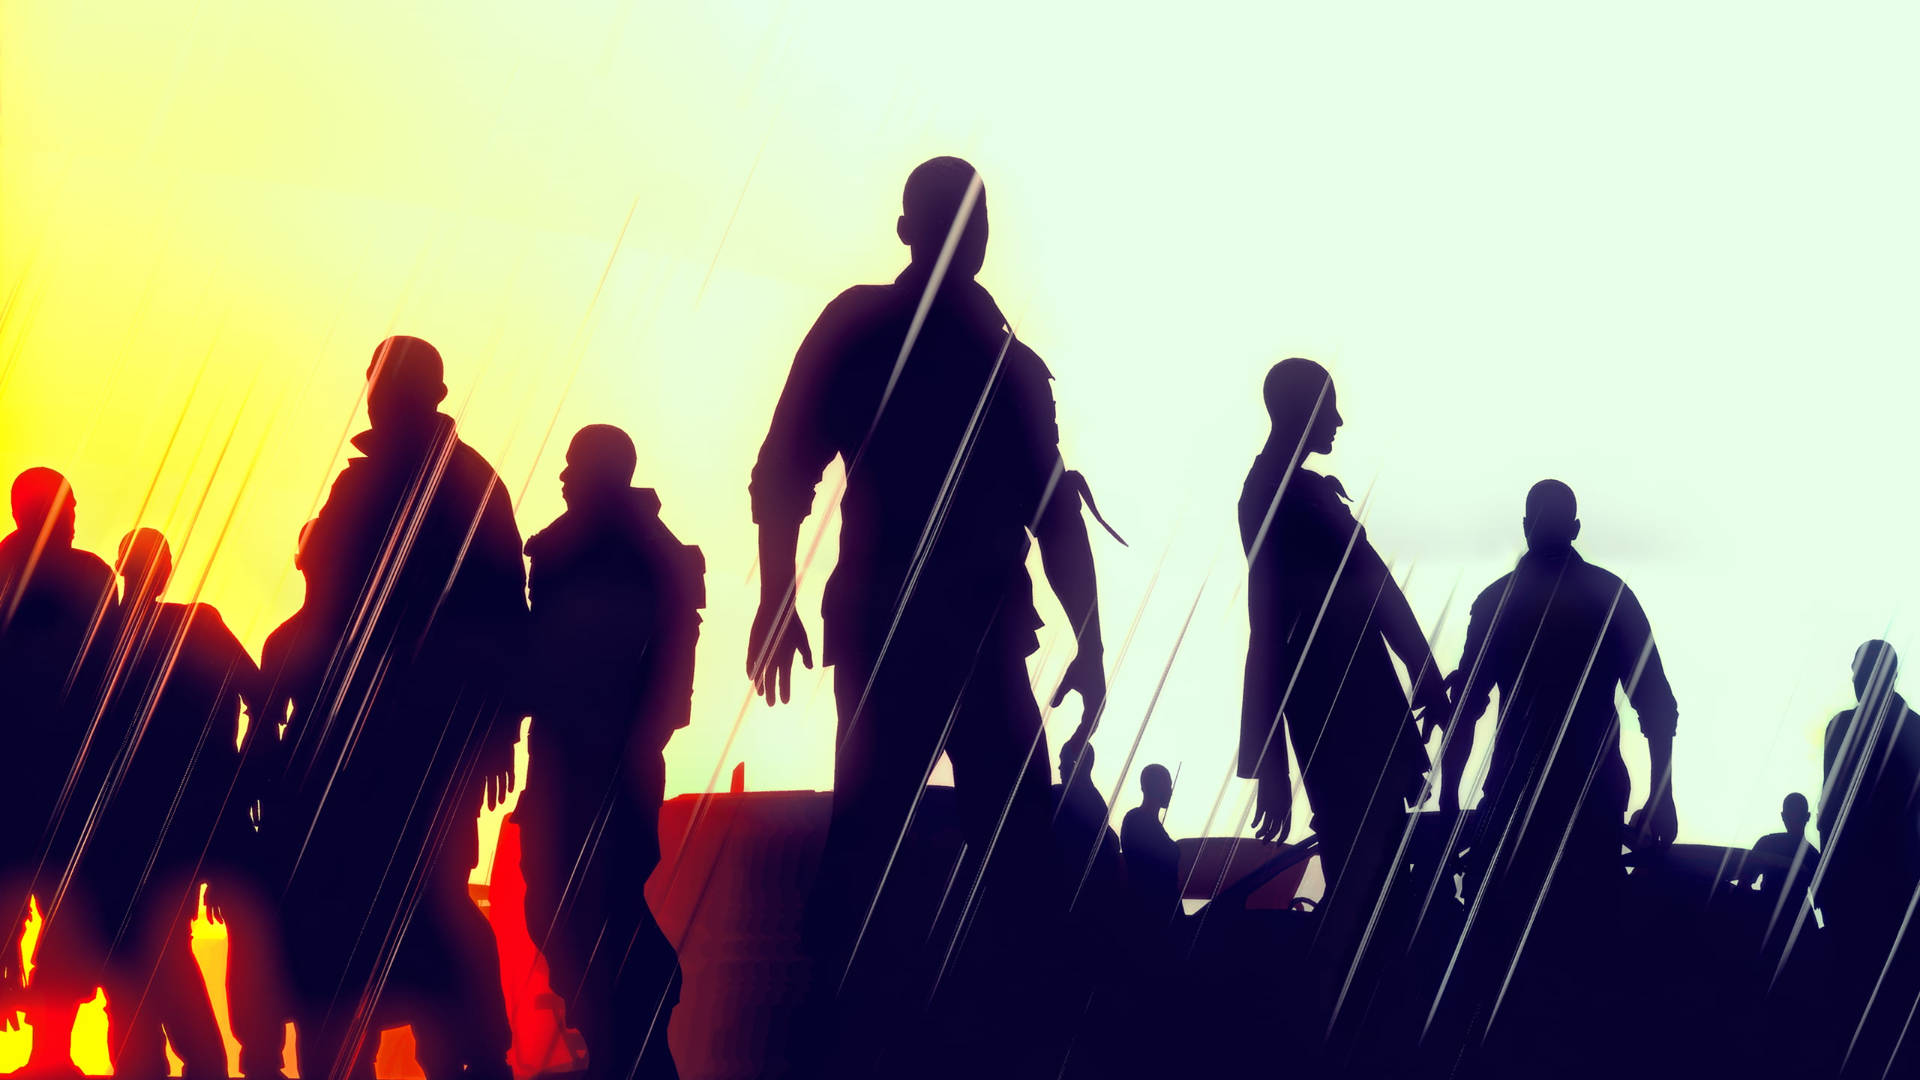 Dying Light Zombie Silhouettes